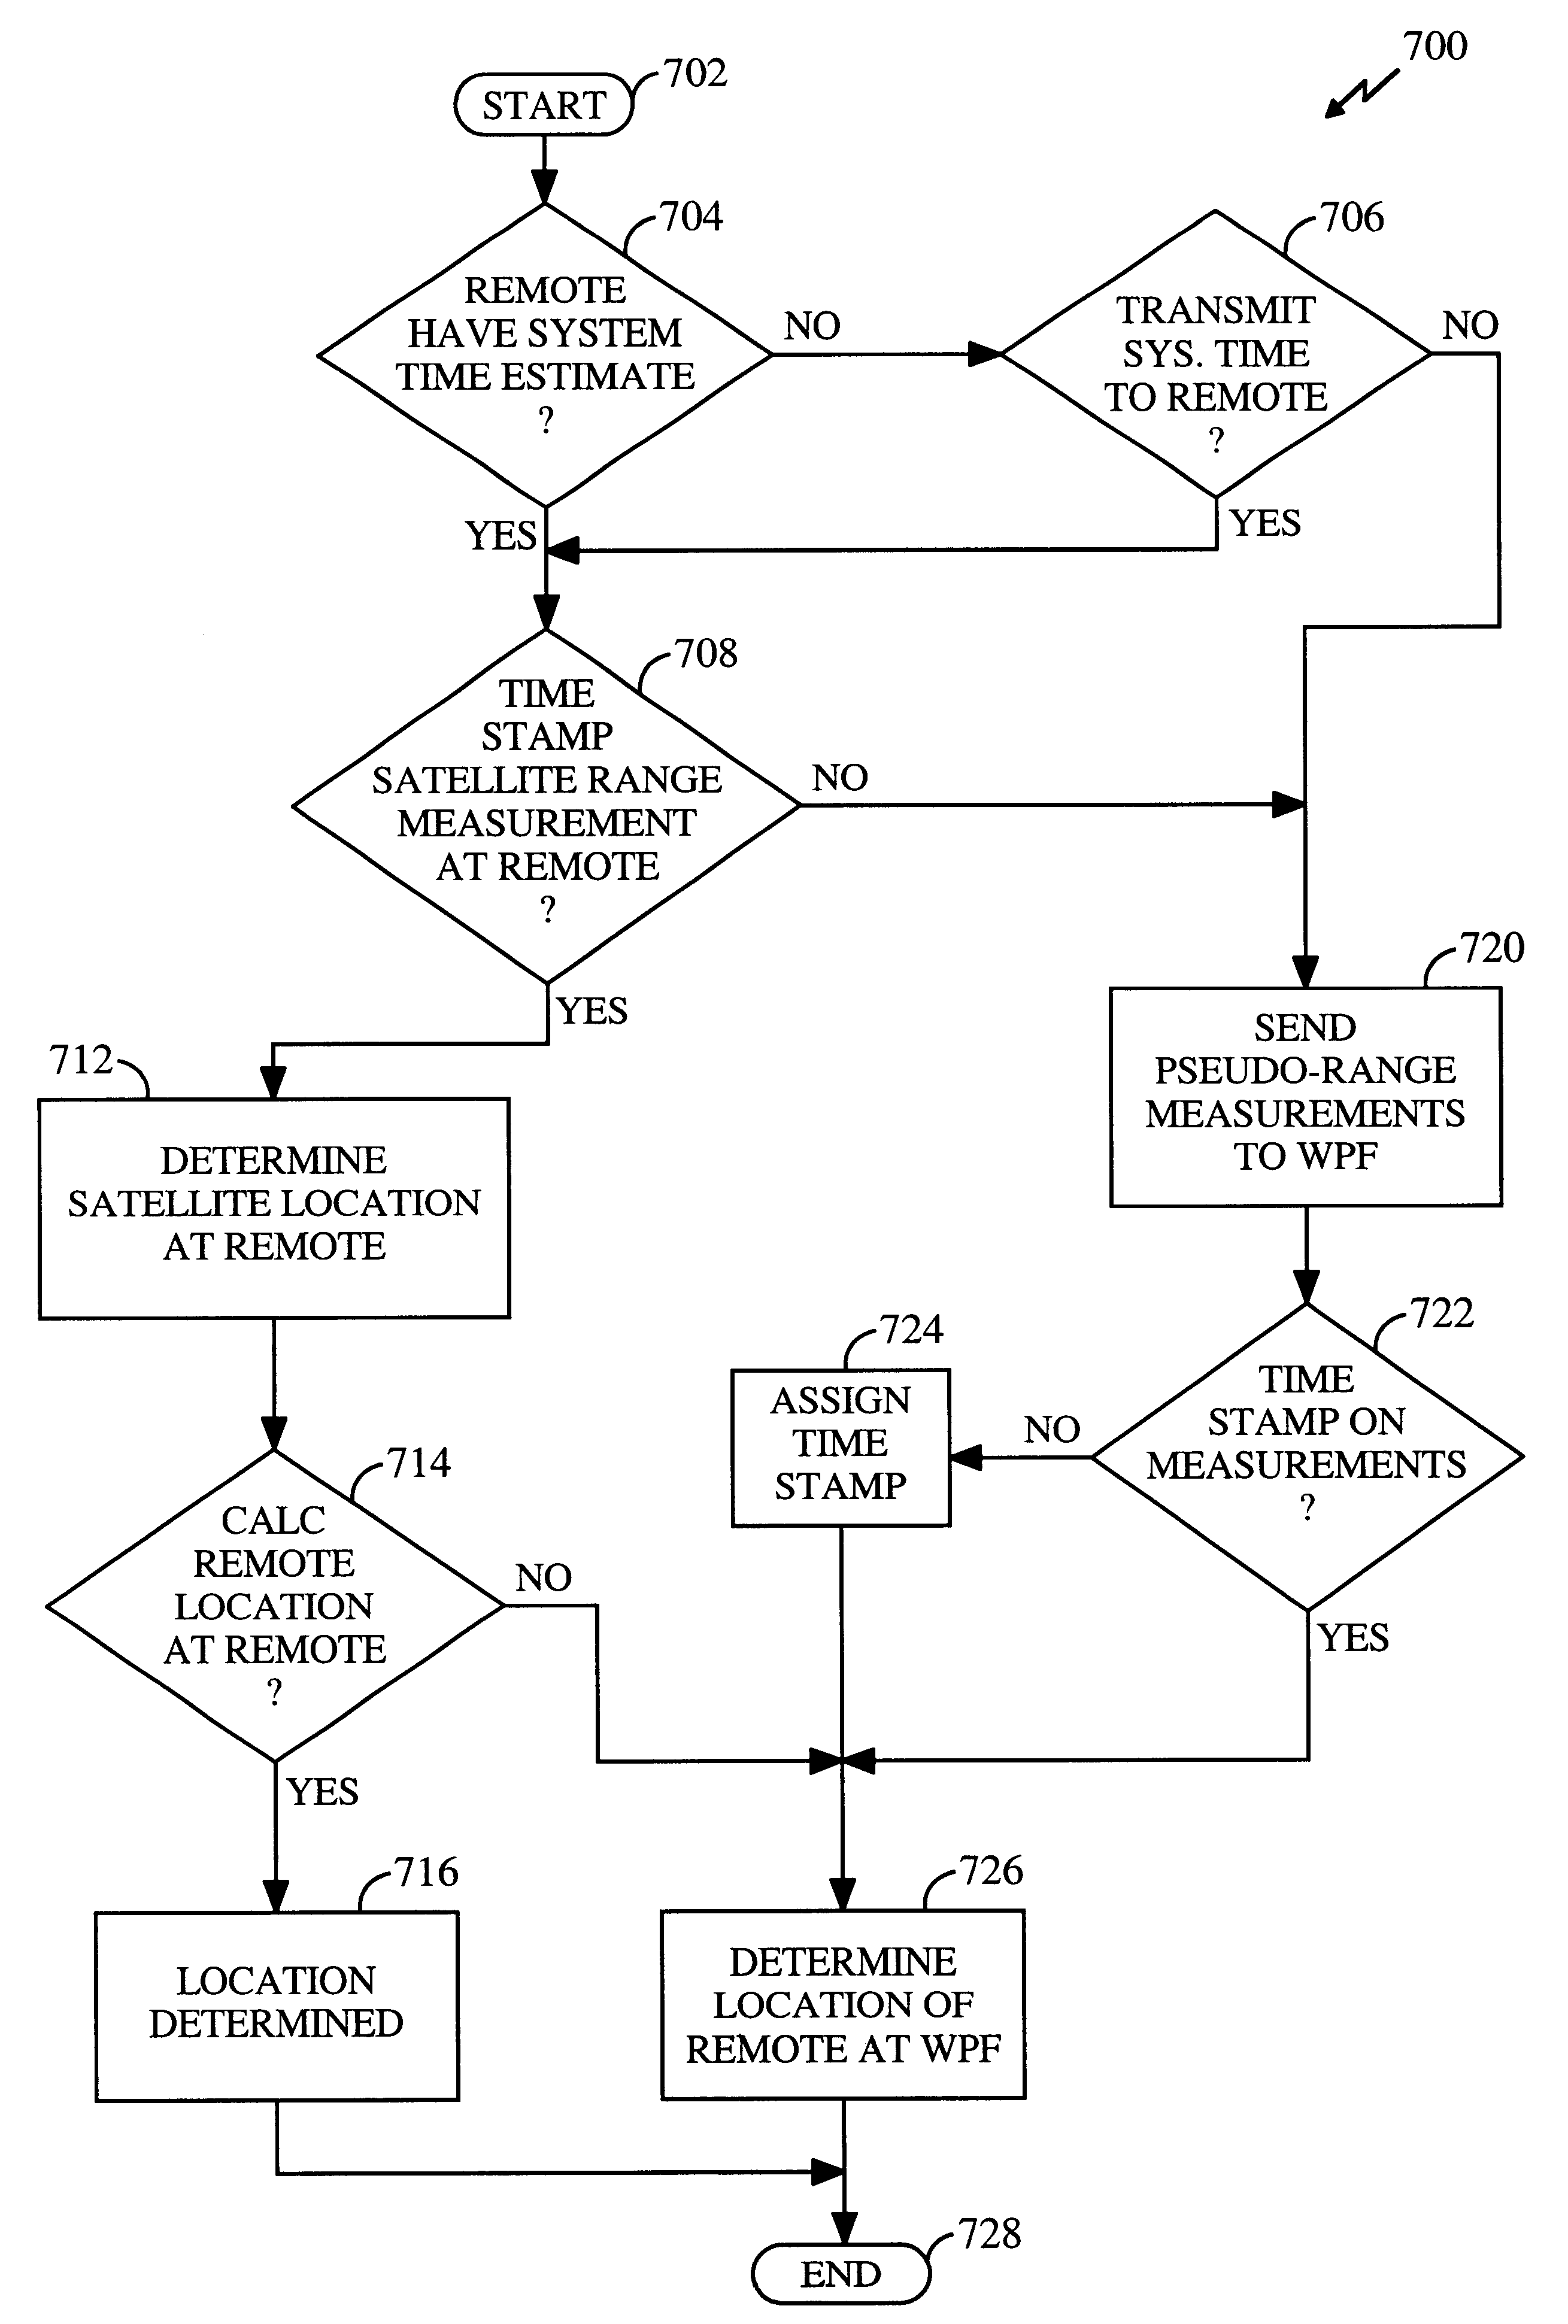 Method and apparatus for locating GPS equipped wireless devices operating in analog mode